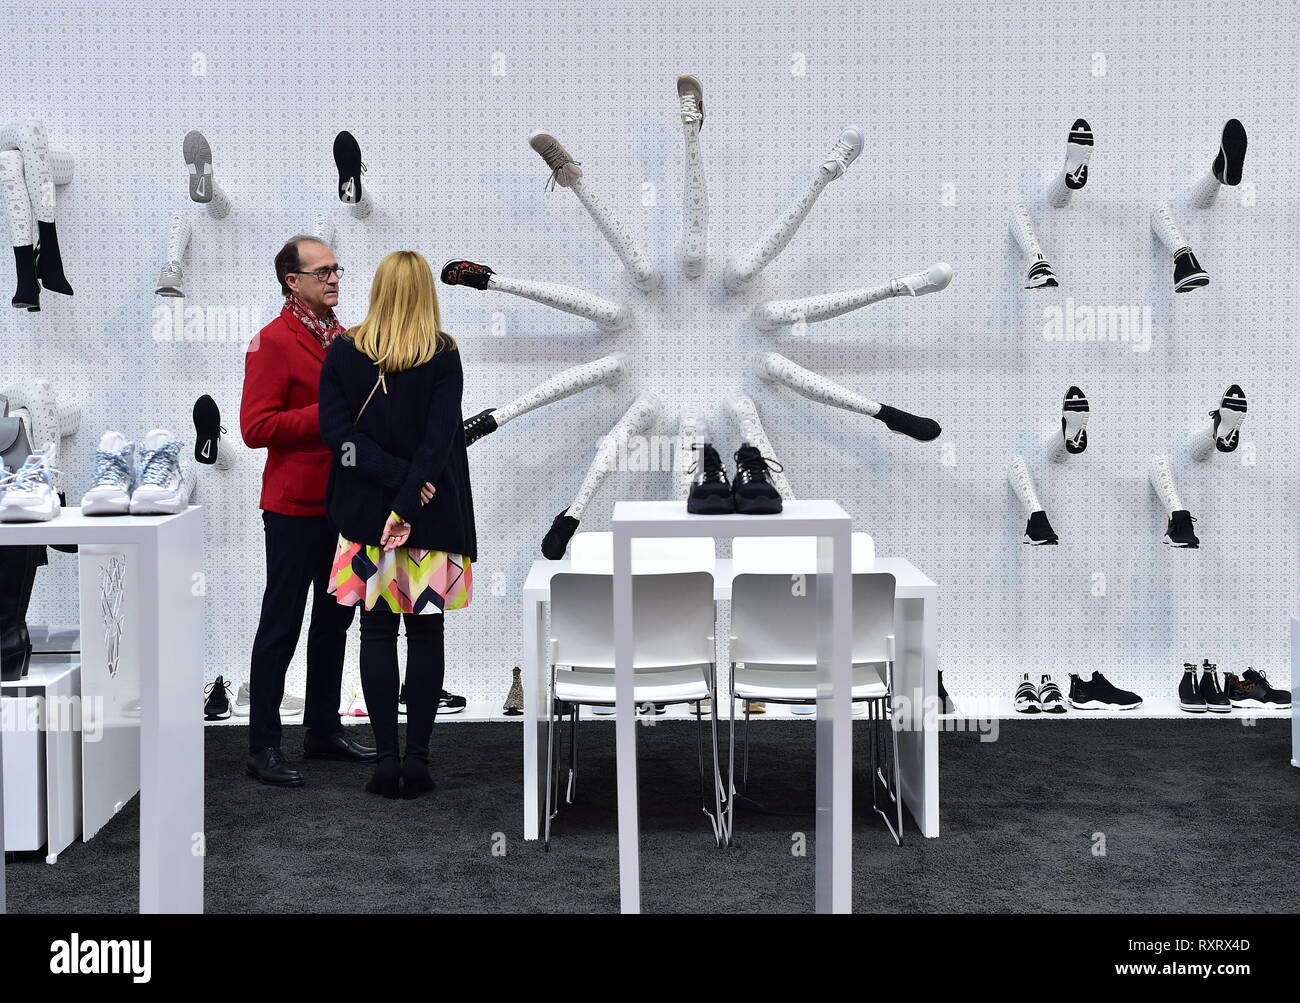 Dusseldorf, Germany. 10th Mar, 2019. People visit the Gallery Shoes in  Dusseldorf, Germany, on March 10, 2019. The International Trade Show for  Shoes and Accessories, namely Gallery Shoes, kicked off Sunday in